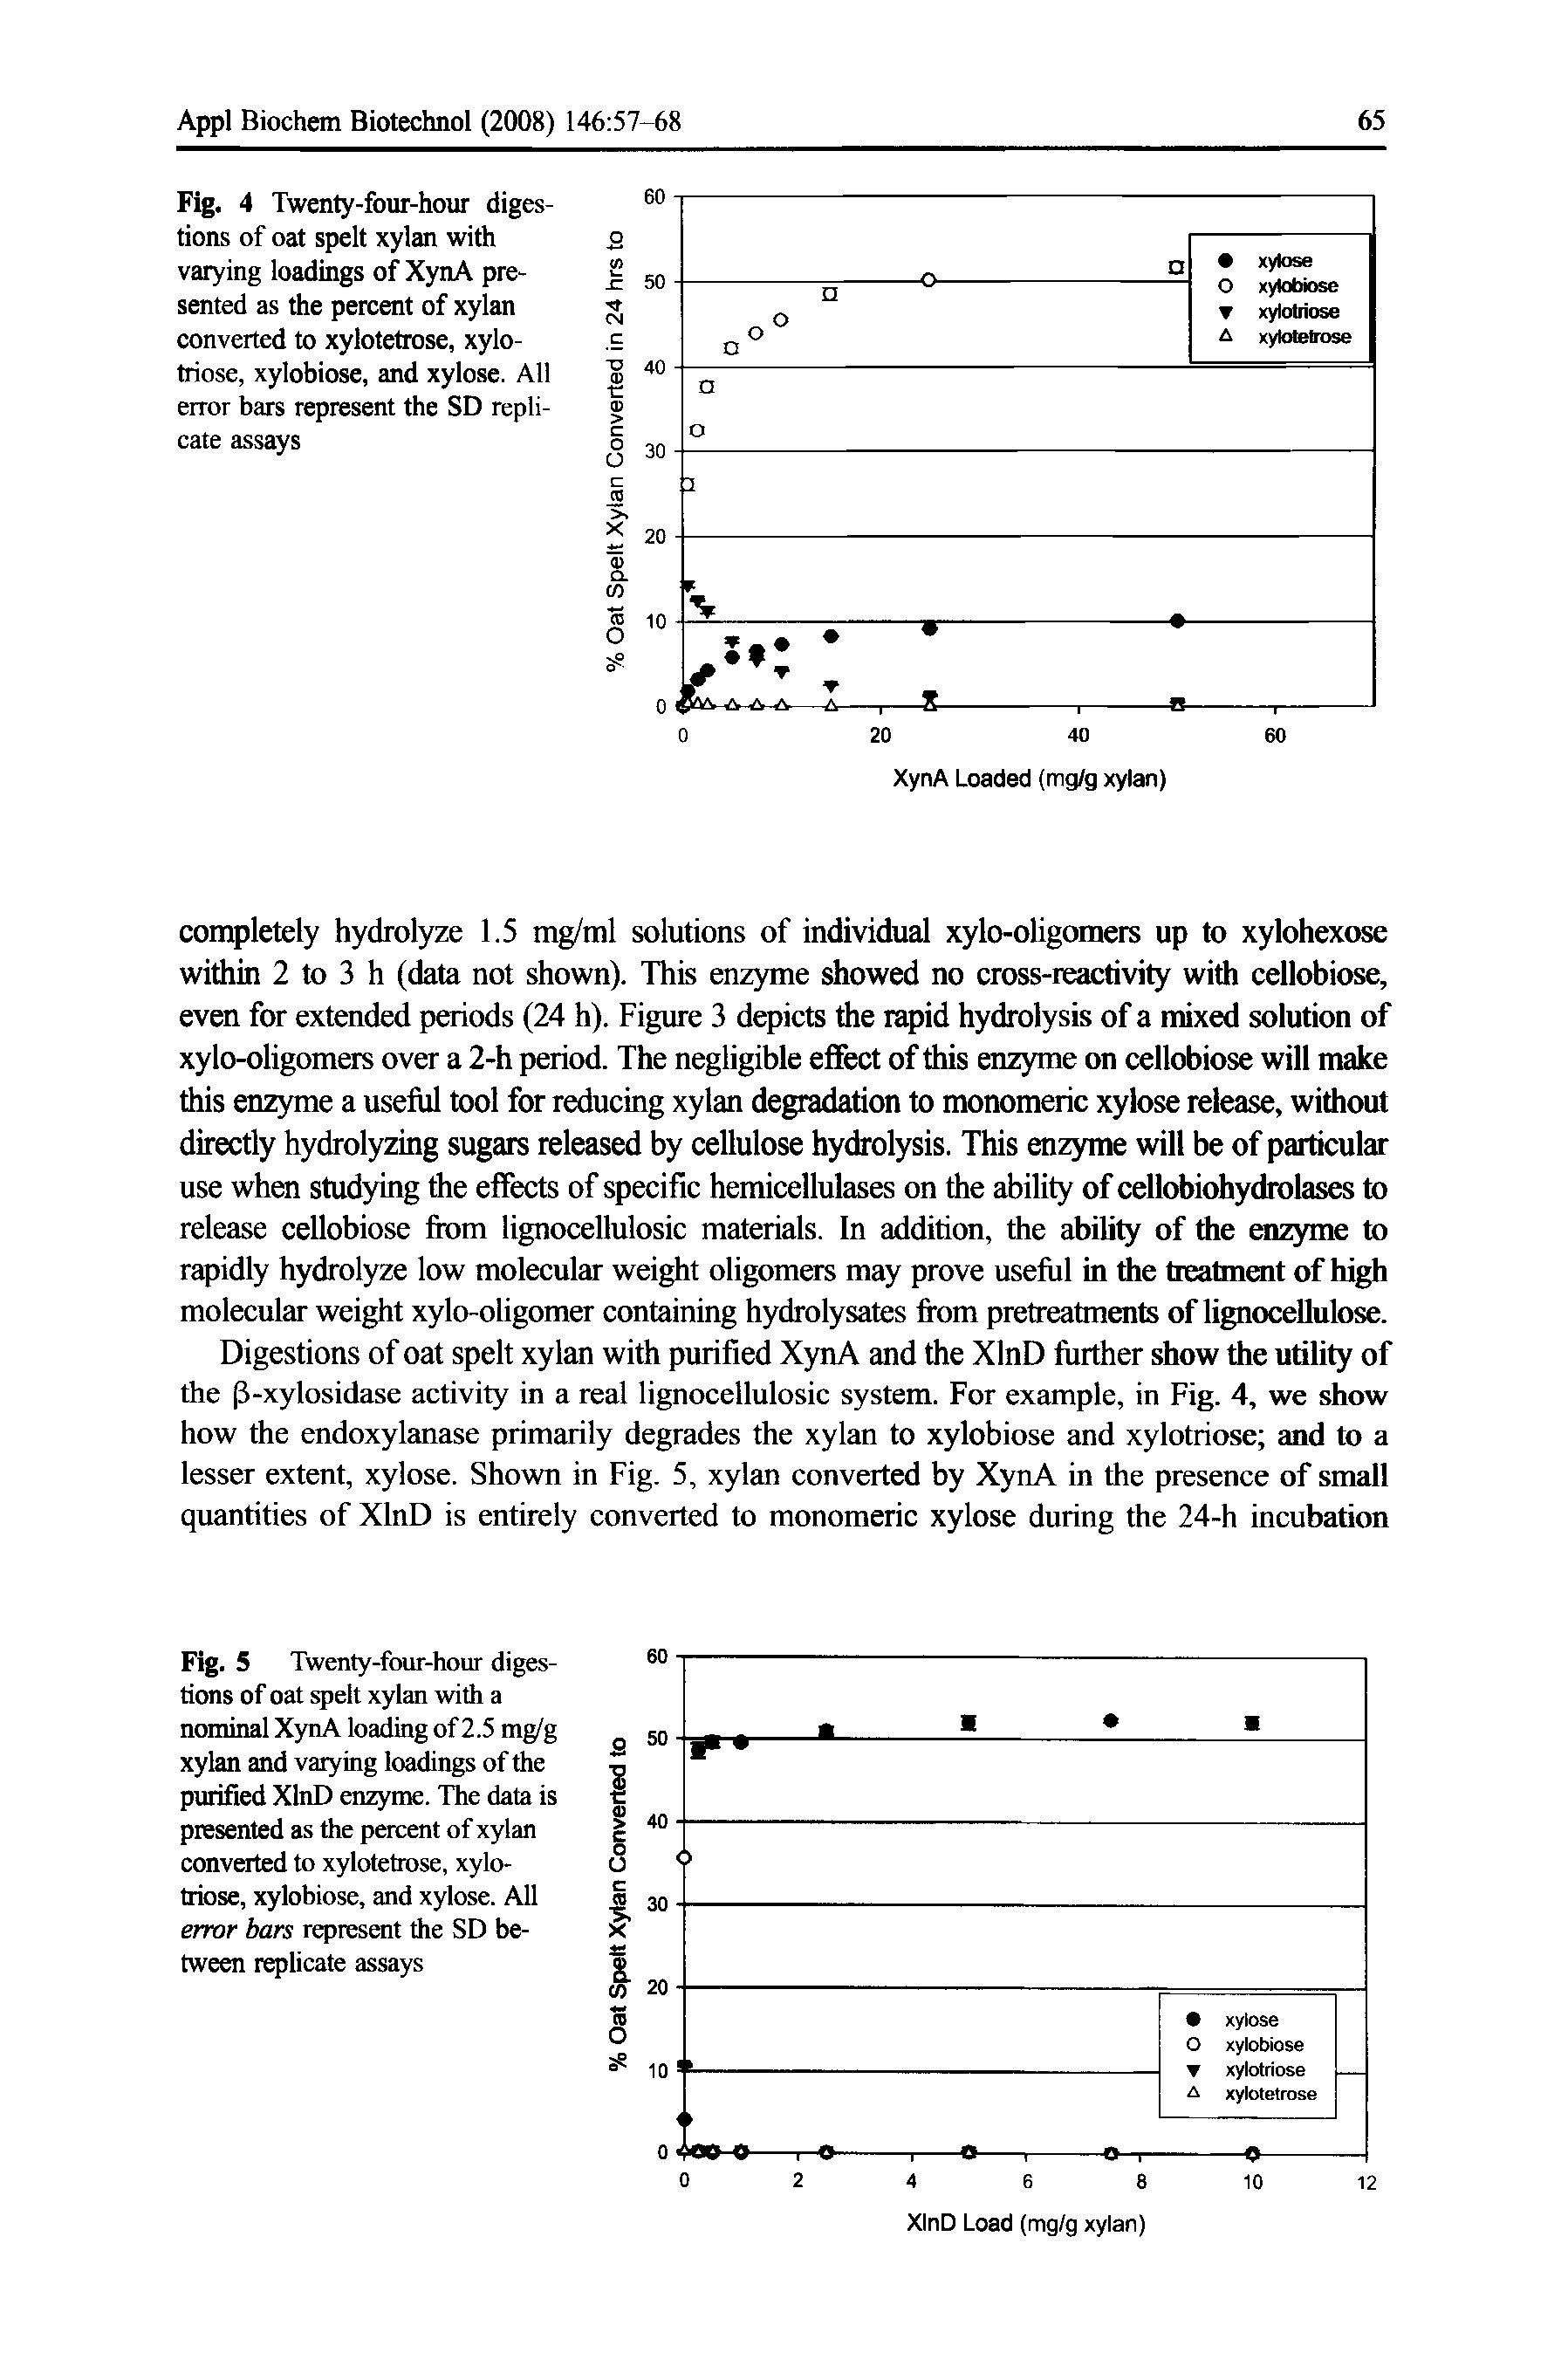 Fig. 5 Twenty-four-hour digestions of oat spelt xylan with a nominal XynA loading of 2.5 mg/g xylan and varying loadings of the purified XlnD enzyme. The data is presented as the percent of xylan converted to xylotetrose, xylotriose, xylobiose, and xylose. All error bars represent the SD between replicate assays...